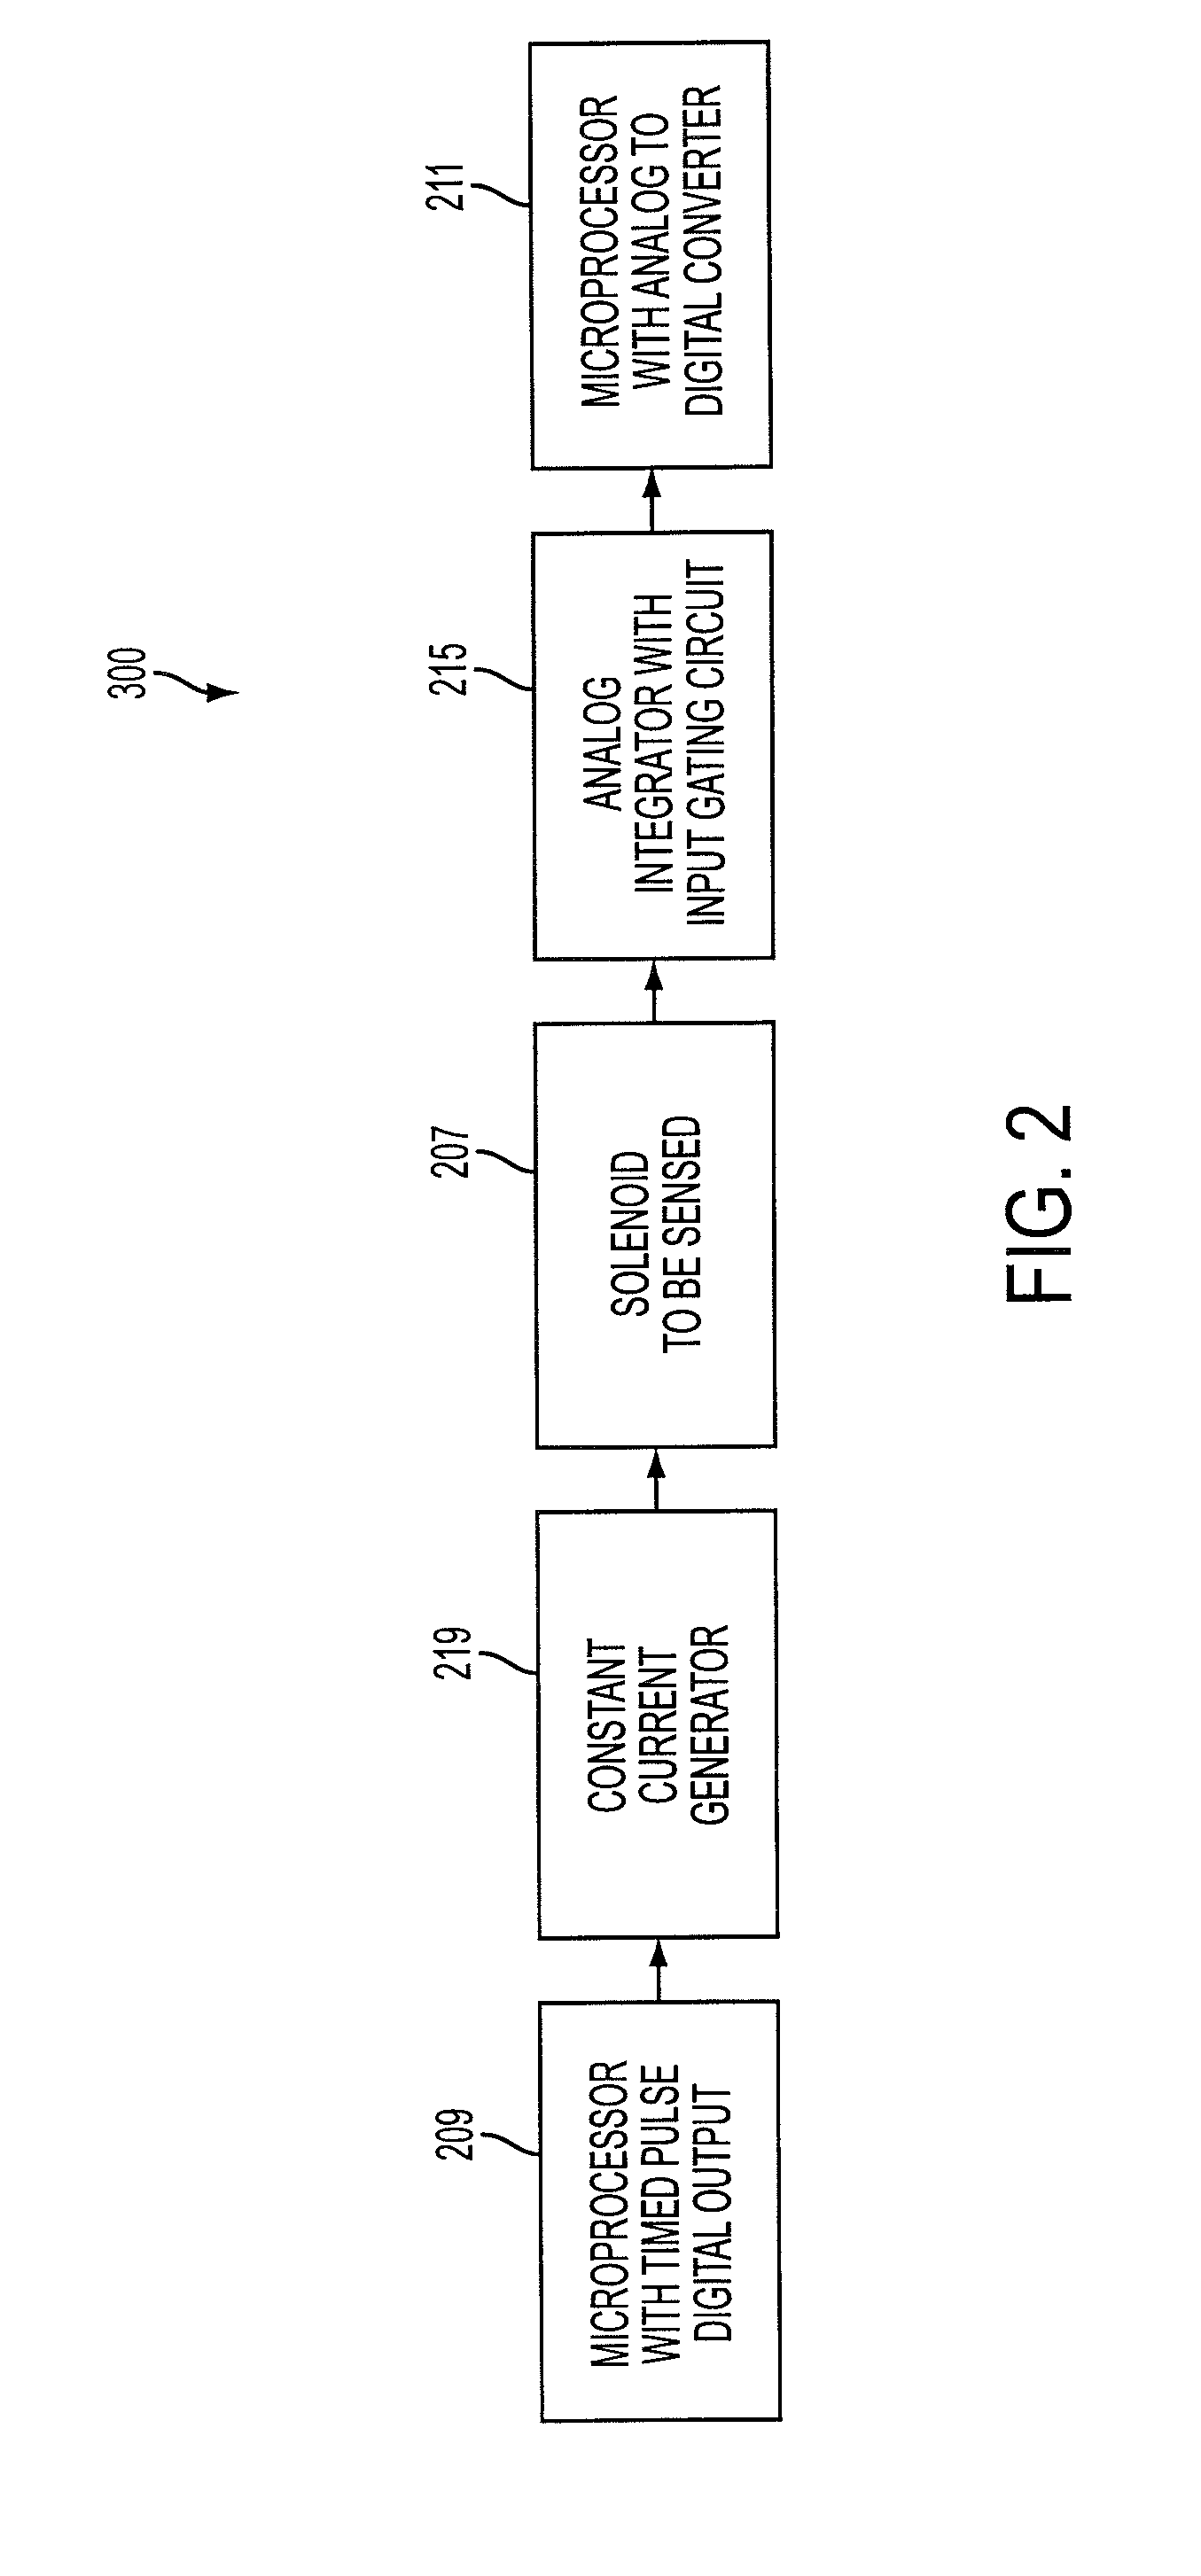 Systems and Methods for Determining the Position of an Electrical Solenoid